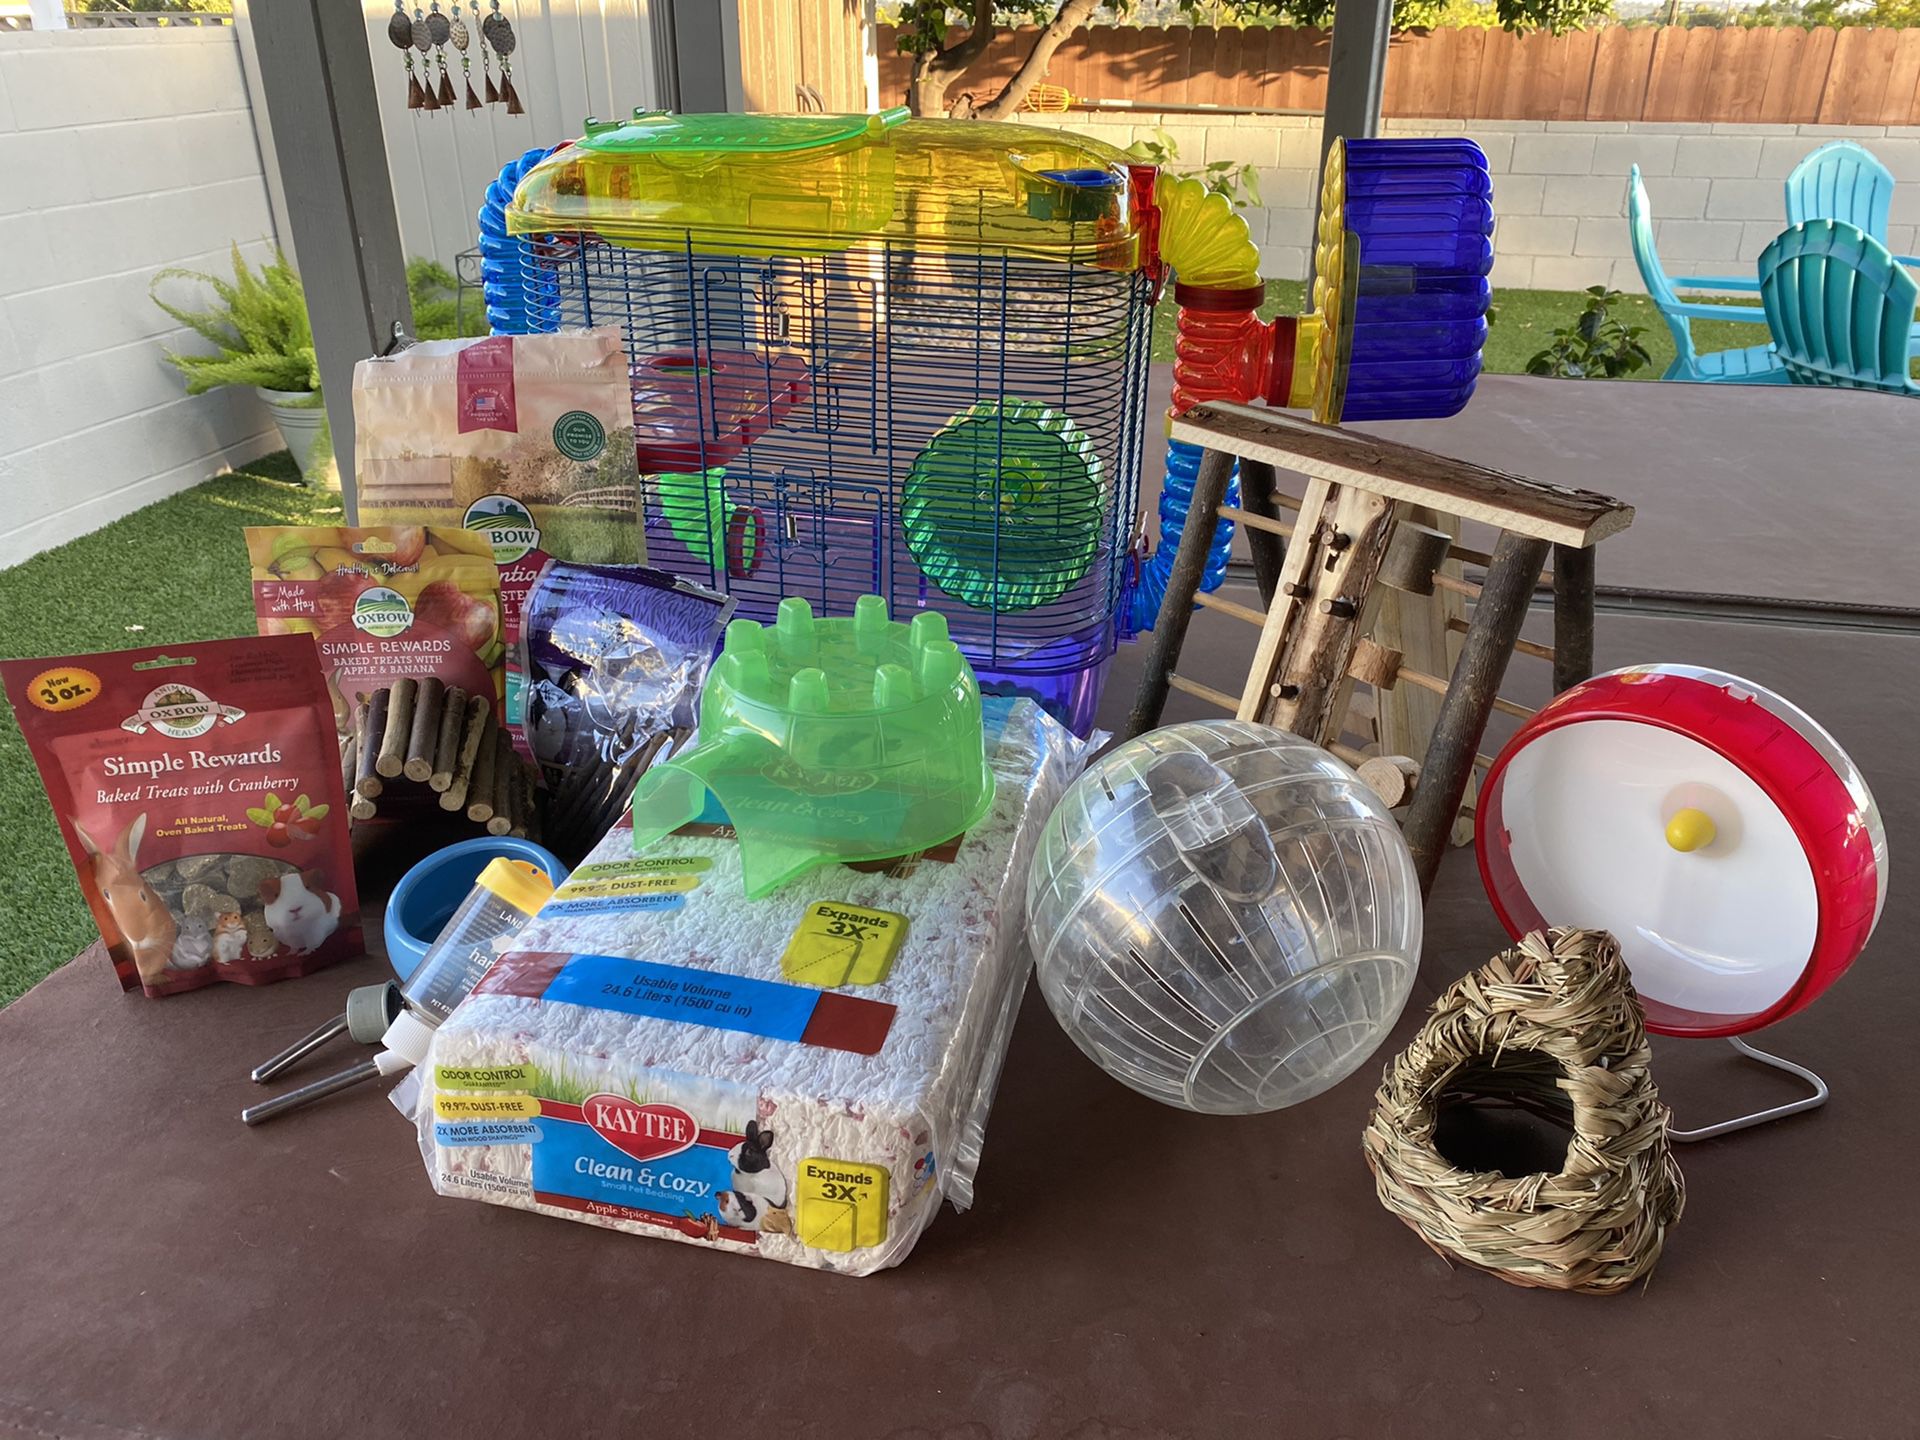 Hamster cage with supplies